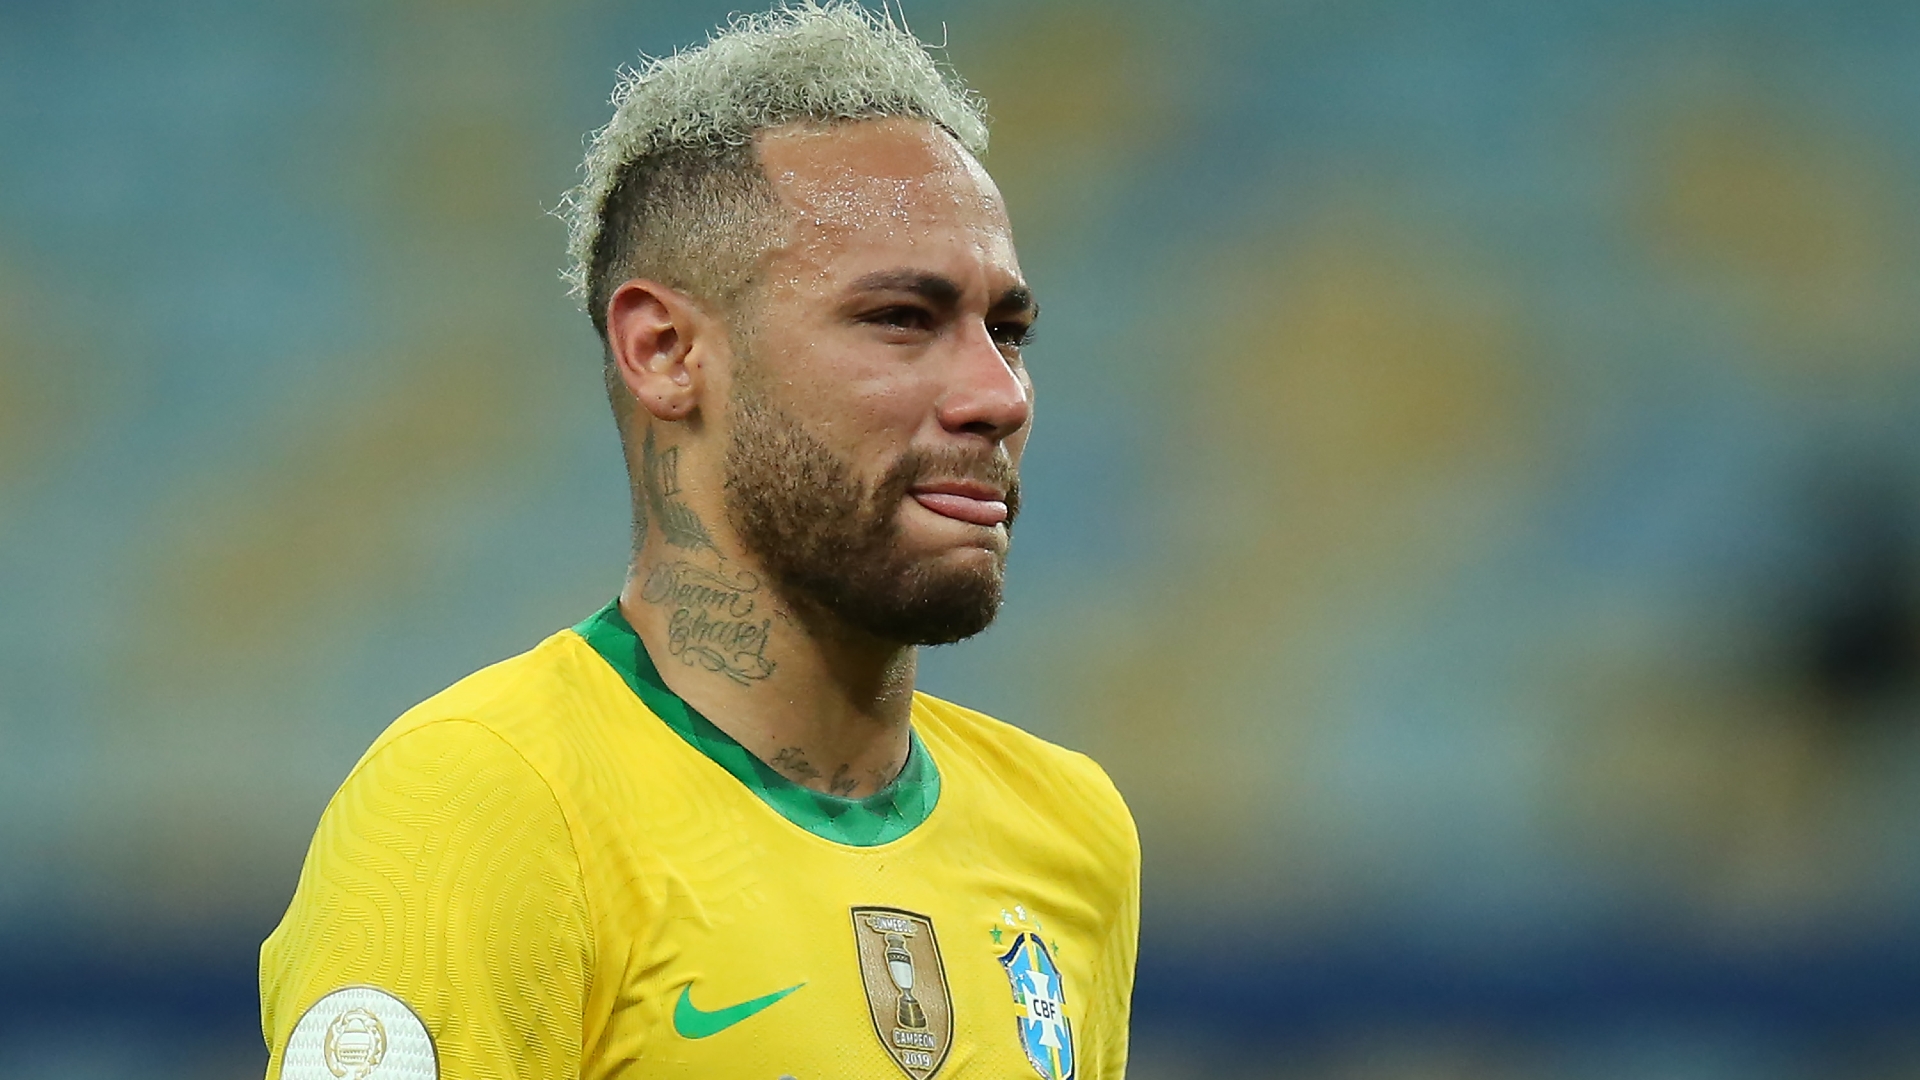 Neymar expects World Cup 2022 to be his last, admitting 'I don't know if I have the strength of mind to deal with football'. Goal.com US